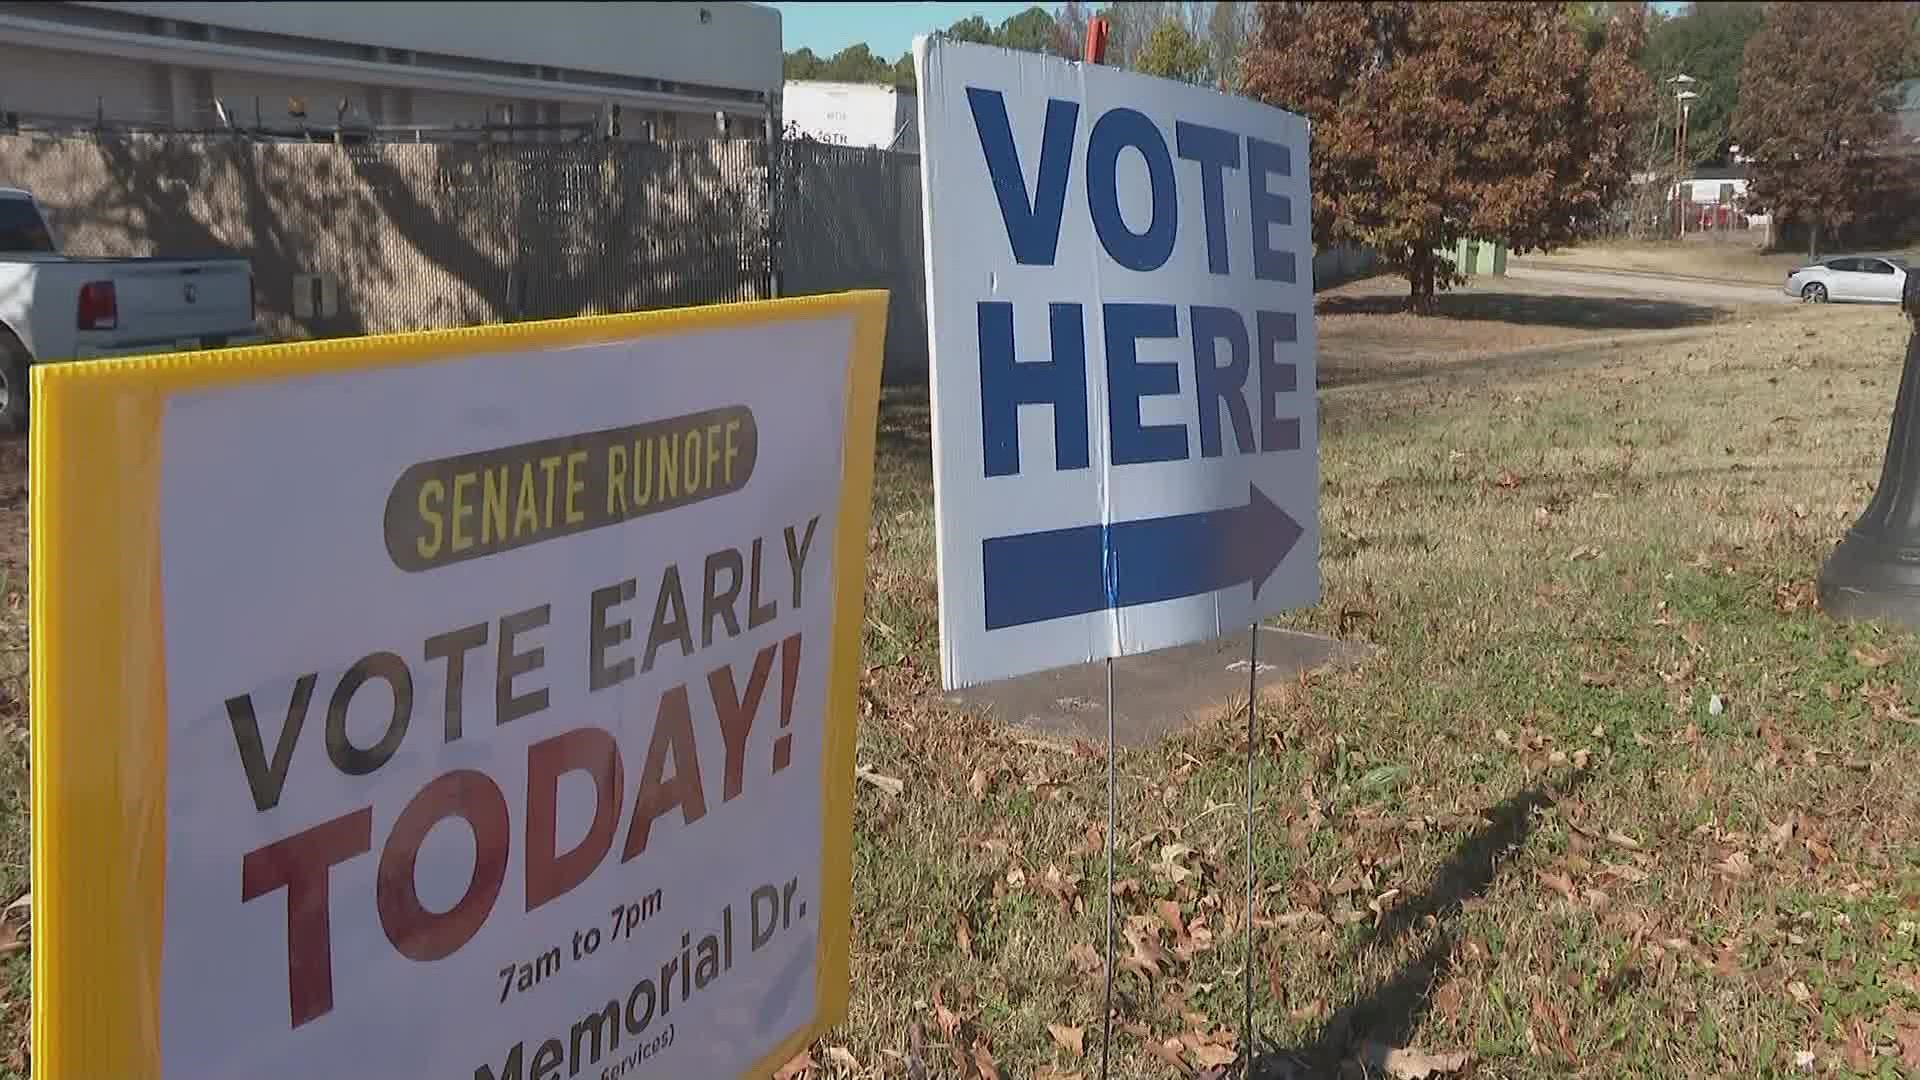 The courts finally ruled this past week that counties could offer early voting on Saturday. Several counties in the metro will make it available to voters.